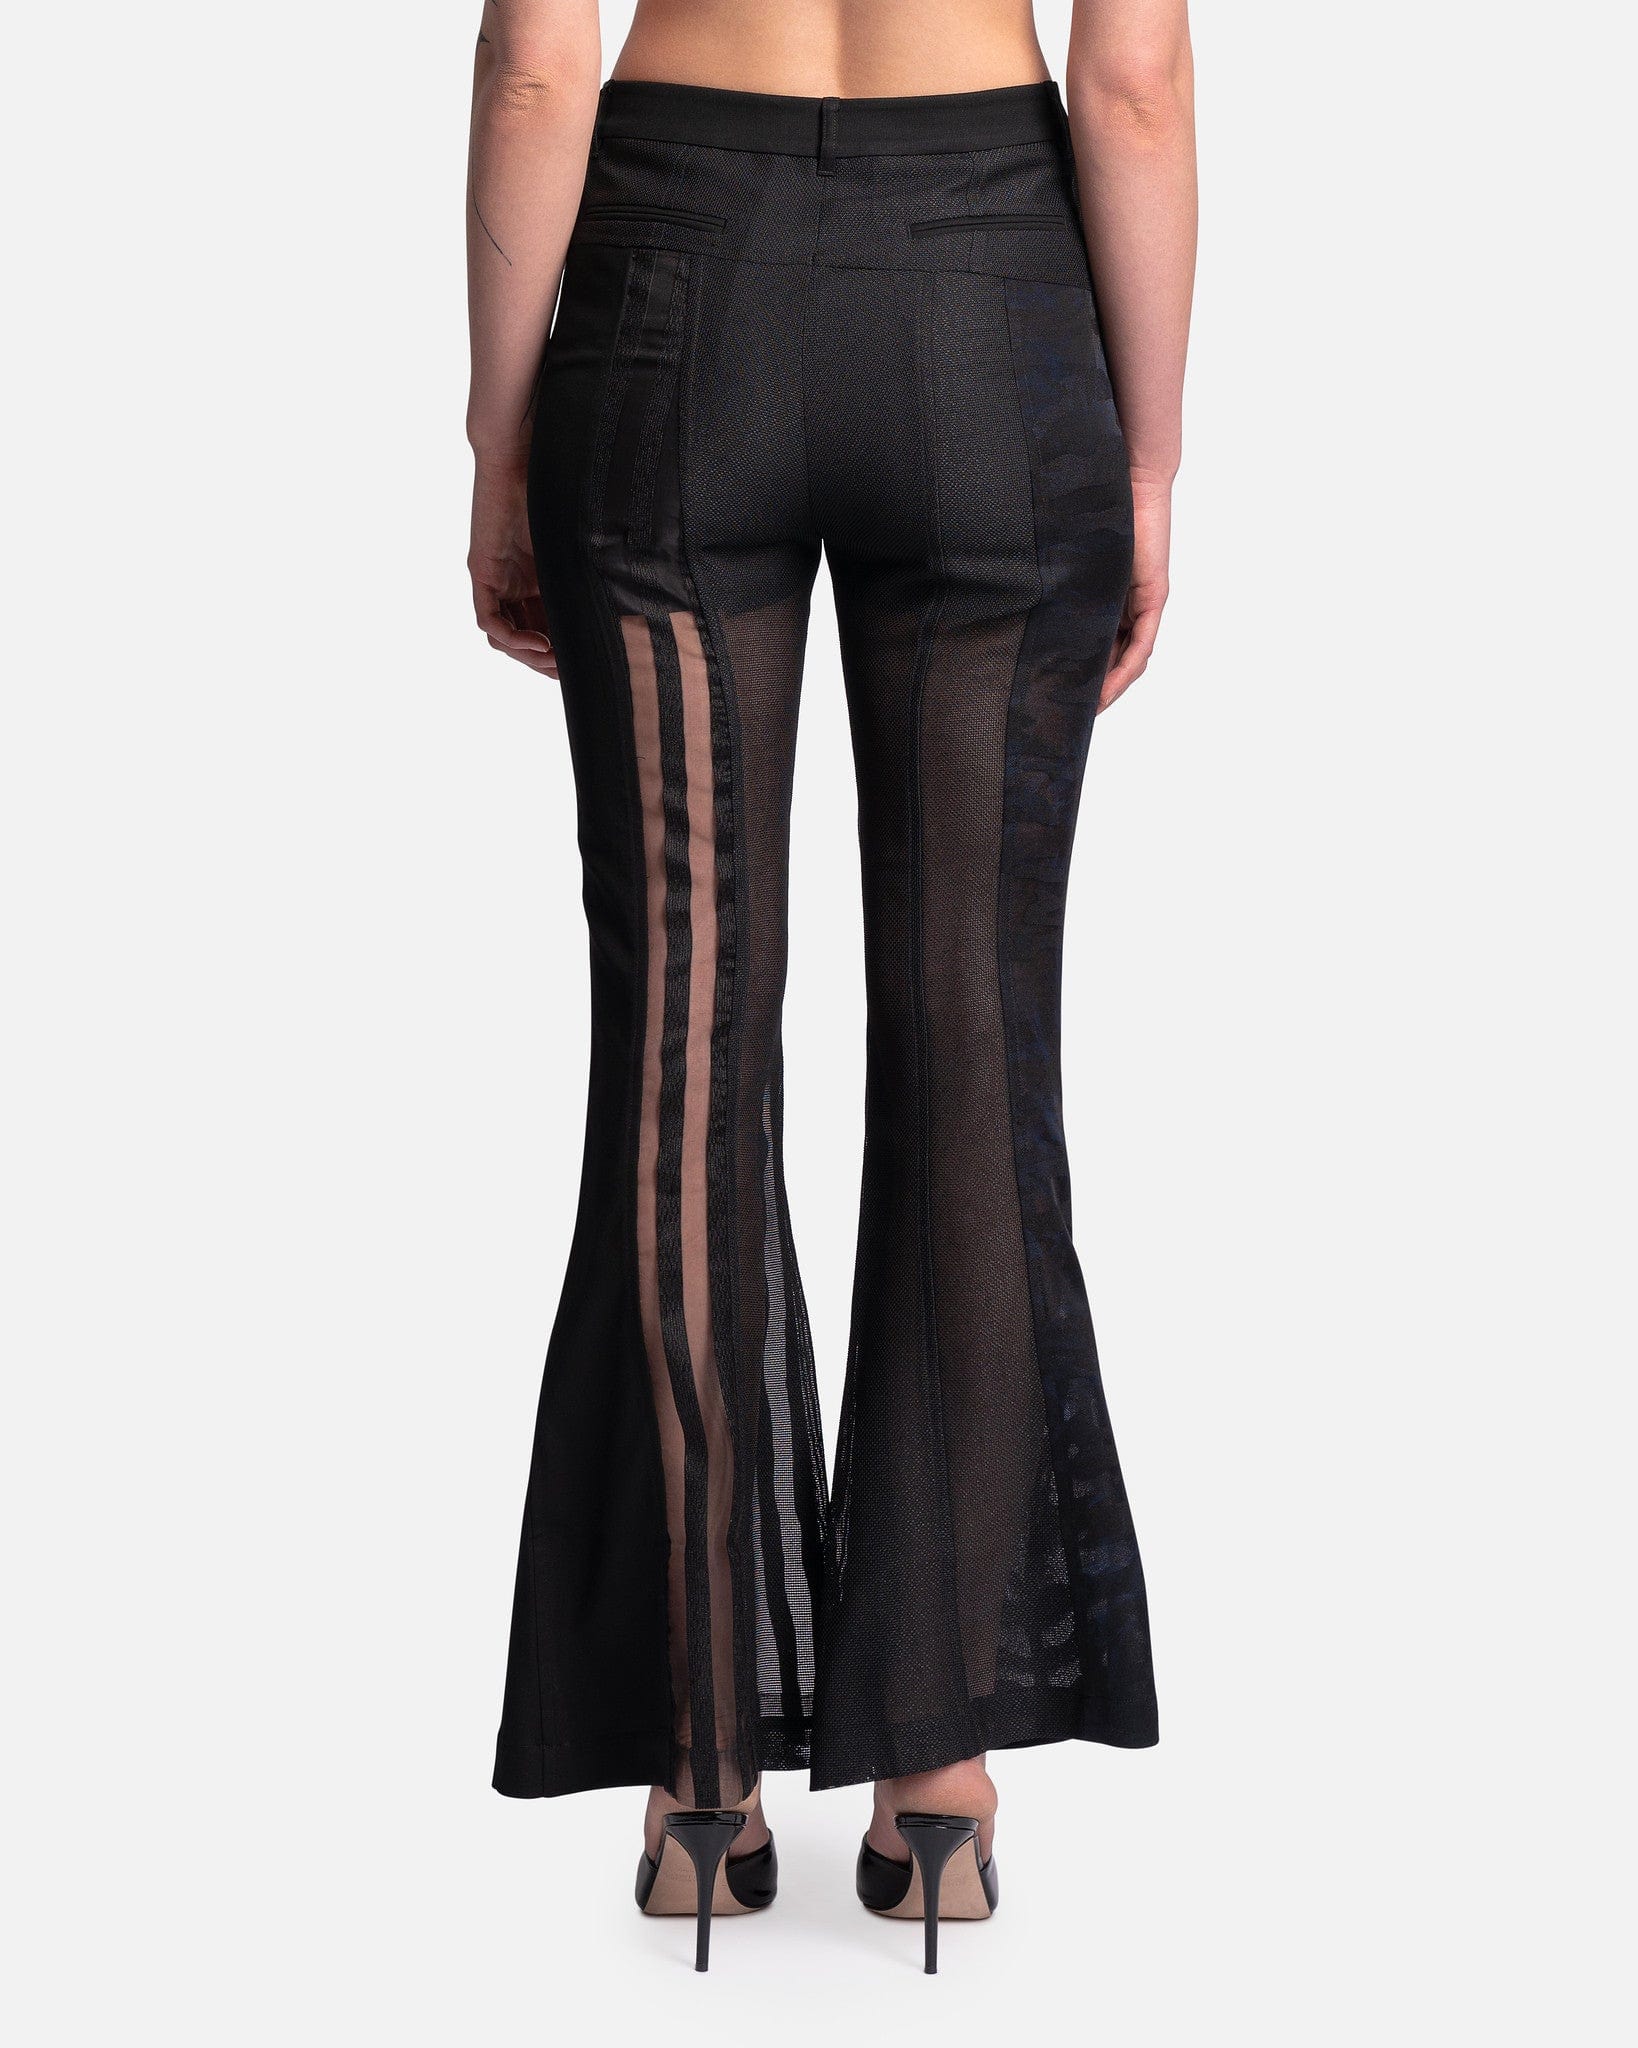 Feng Chen Wang Women Pants Translucent Flared Trousers in Black